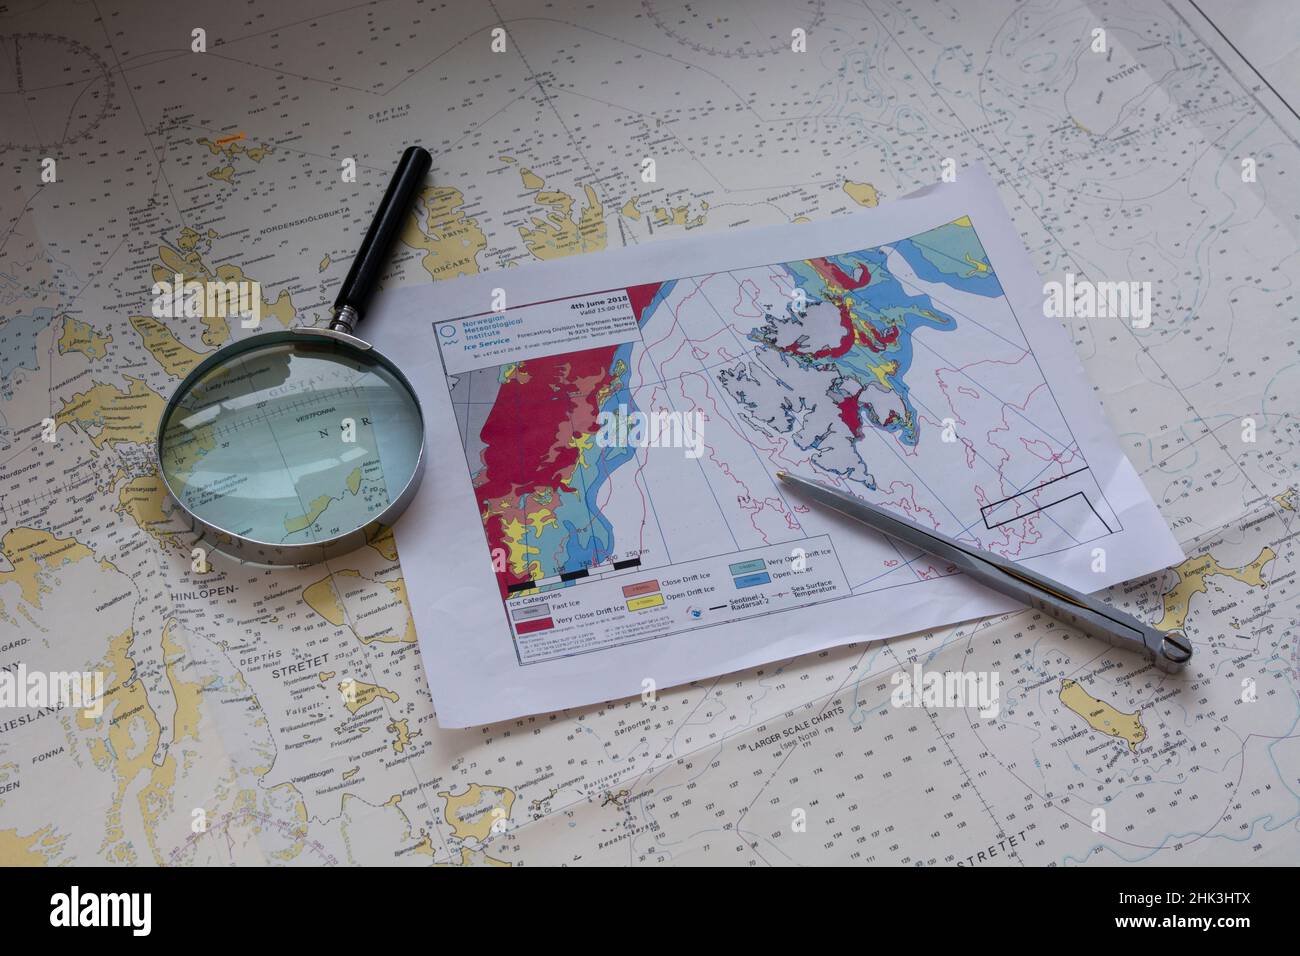 The map of Svalbard Islands and polar ice cap extension. Stock Photo